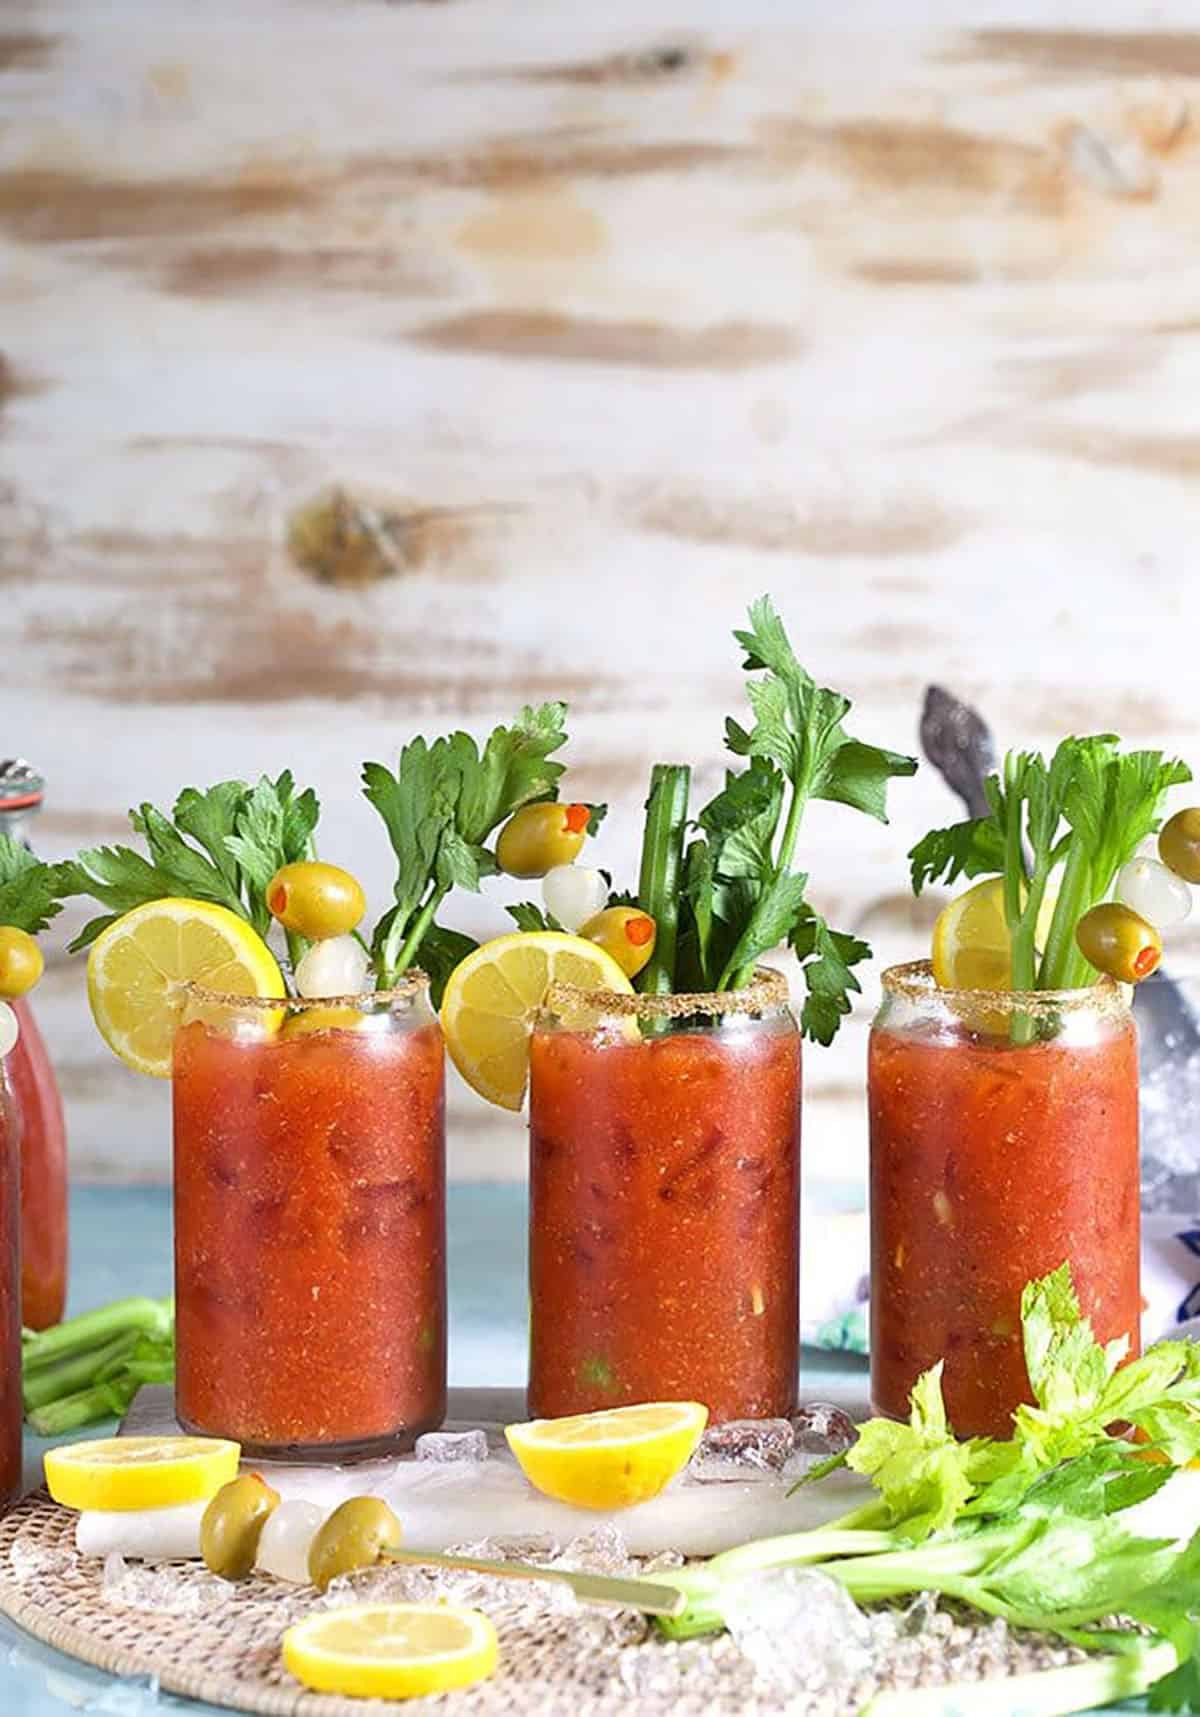 Bloody Mary cocktails lined up on a wicker placemat.